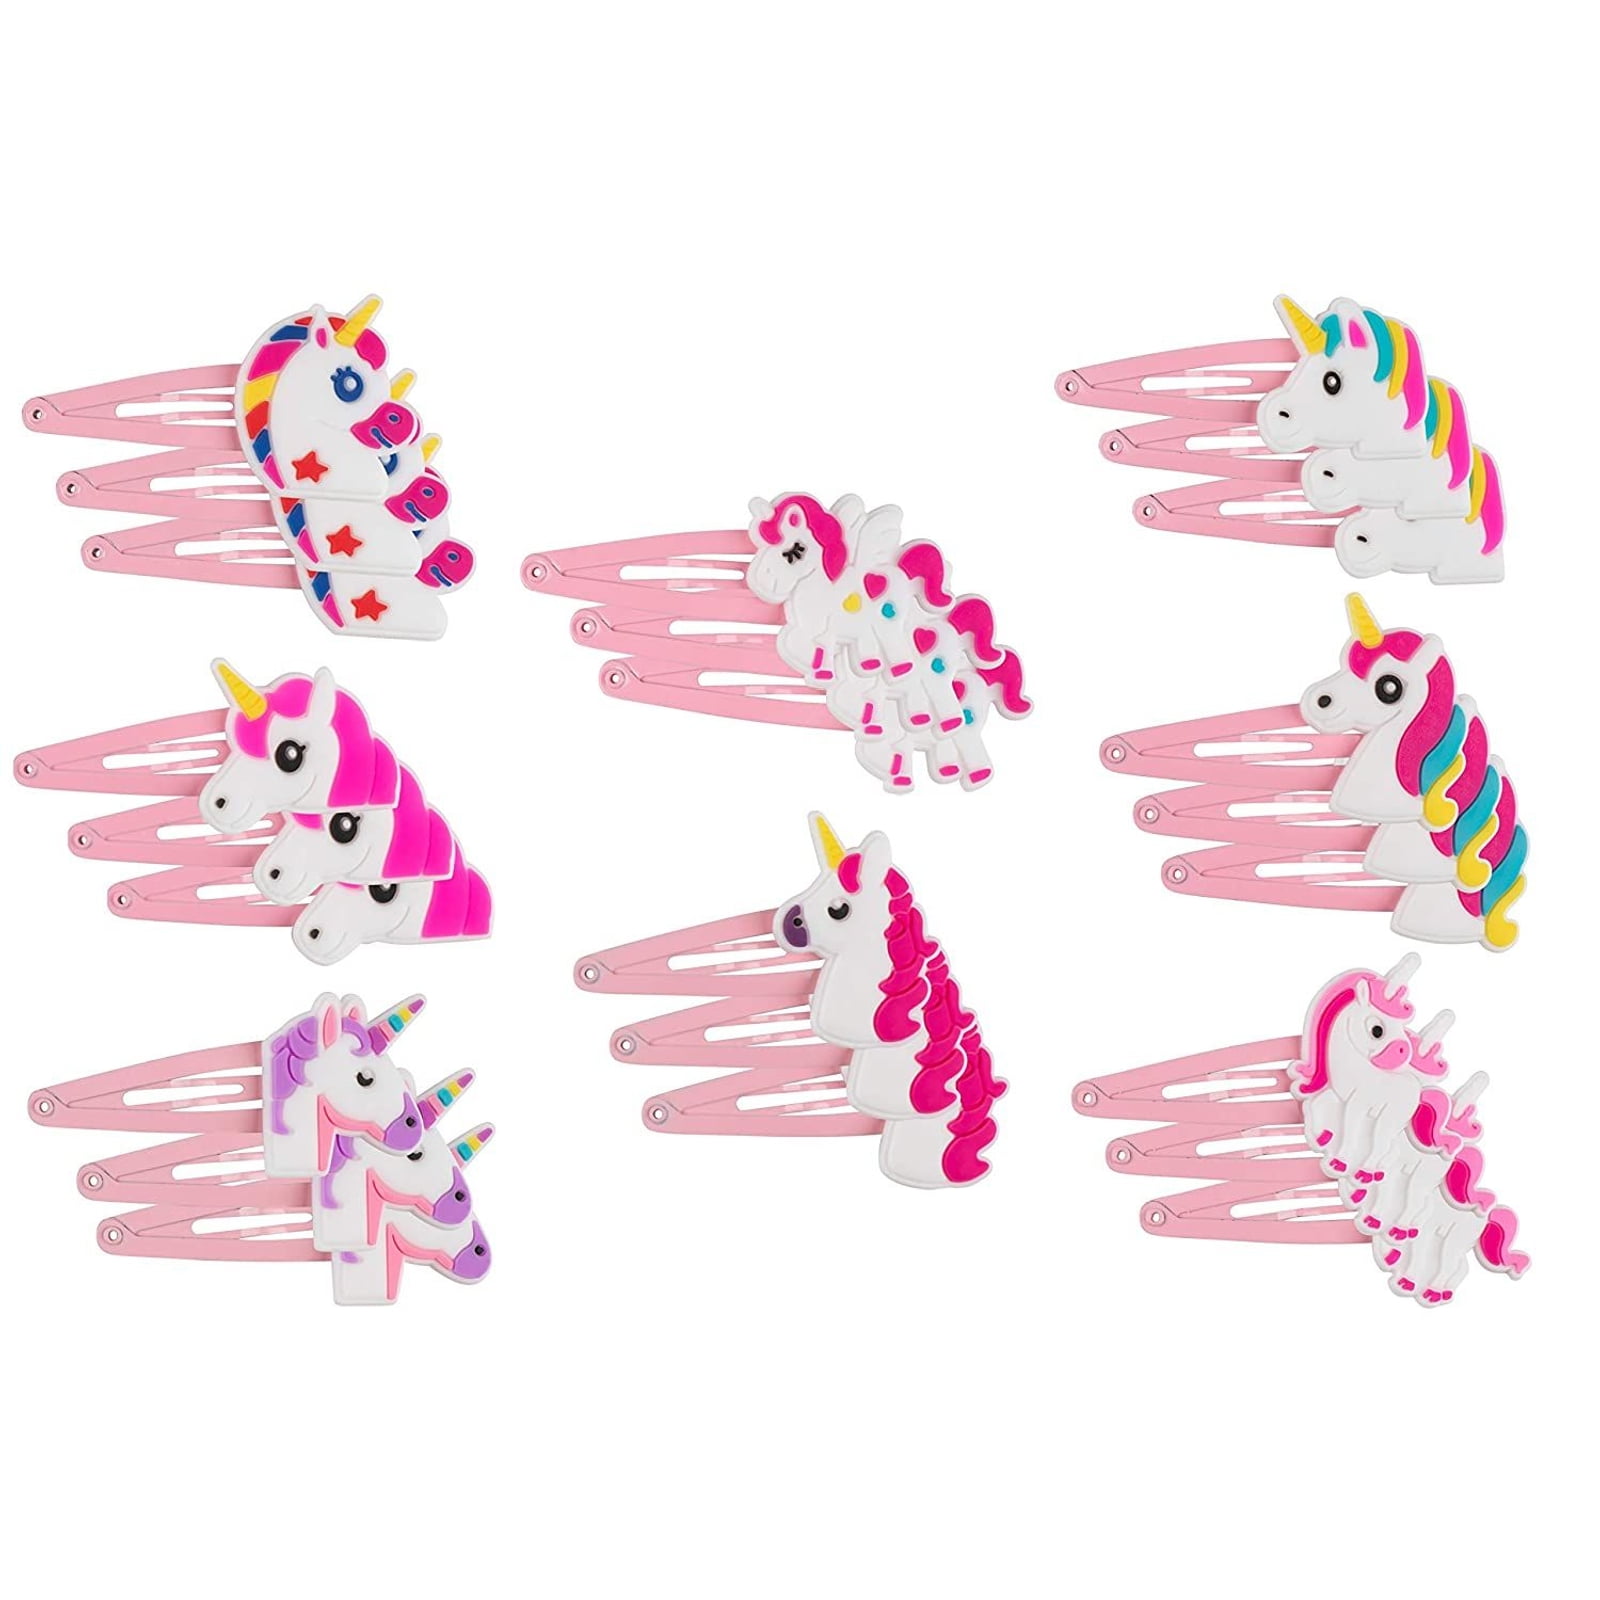 4 Alligator Ice Cream Hair Clip Set Set of 8 Colorful Kawaii Barrettes Bright Colorful Candies 4 Snap Clips Cute Hair Accessories